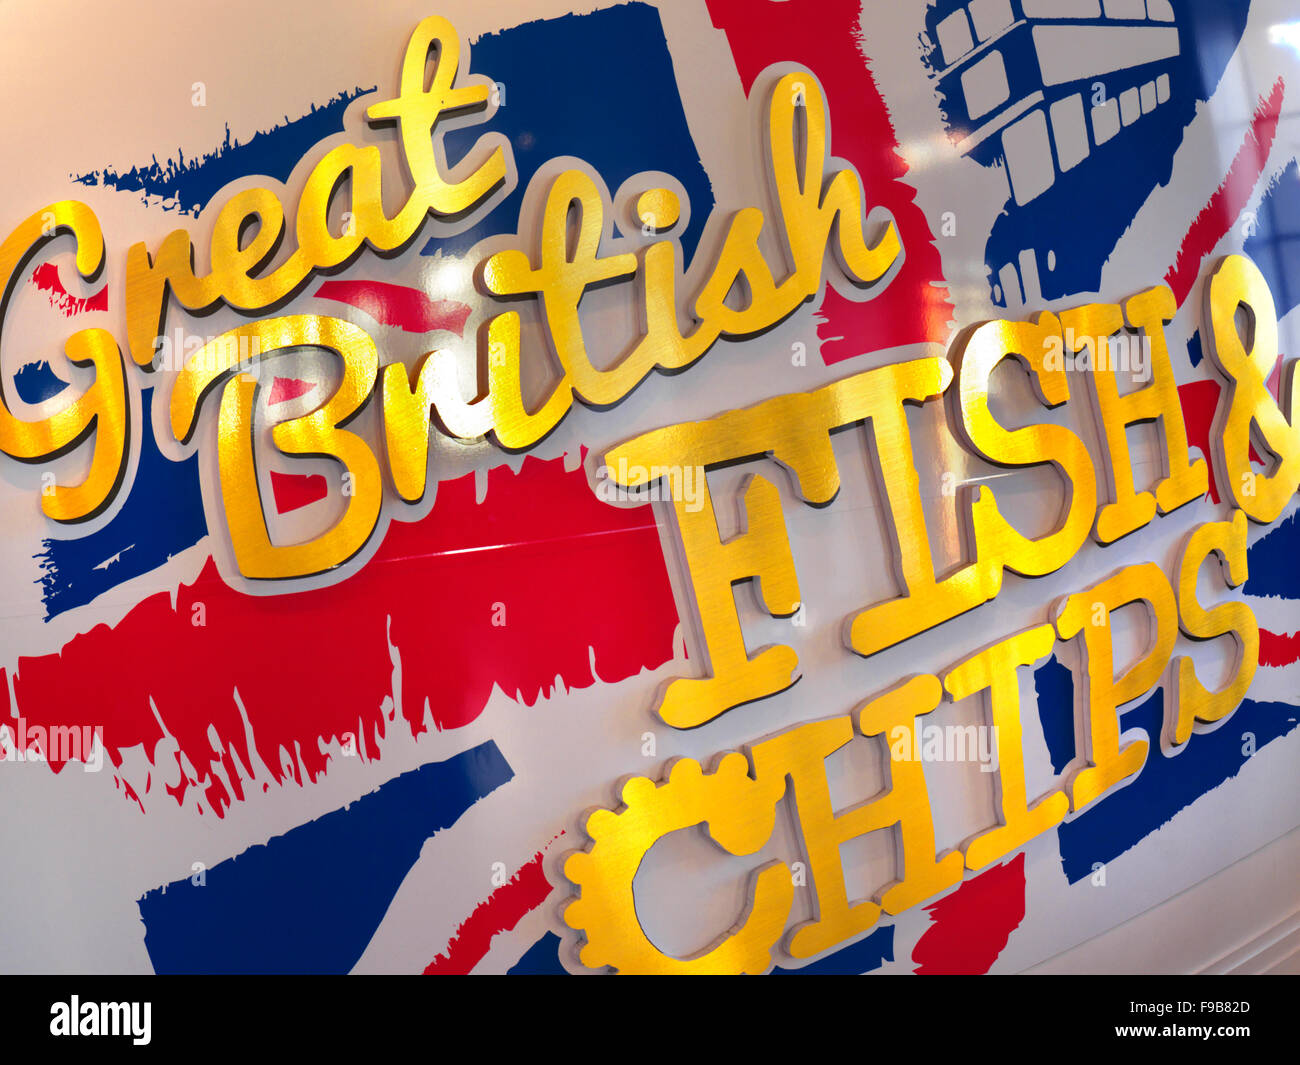 Close up view on Fish and chips outlet interior sign with patriotic British branding Stock Photo